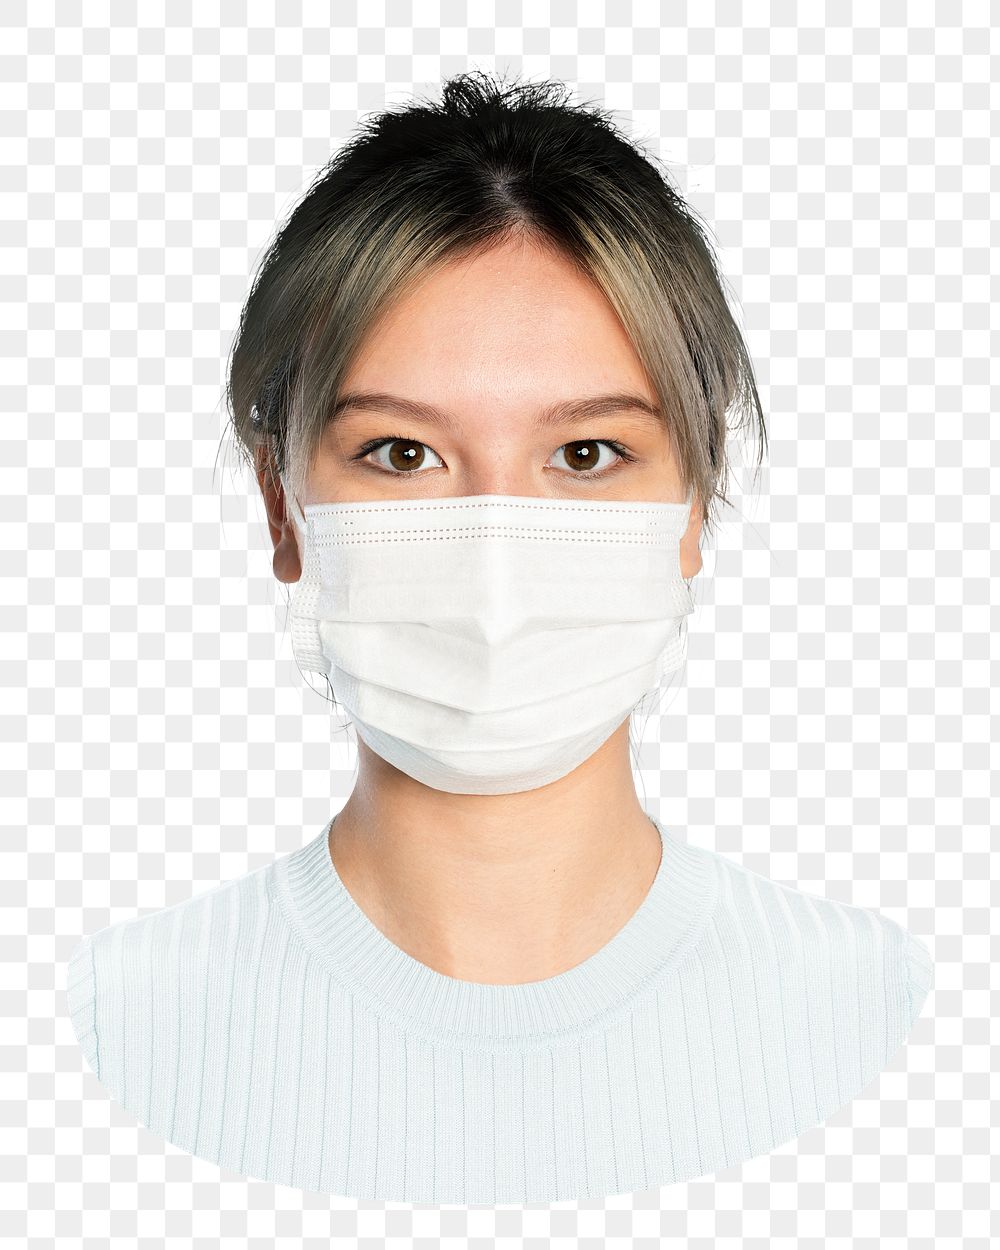 Young woman png wearing a face mask, transparent background